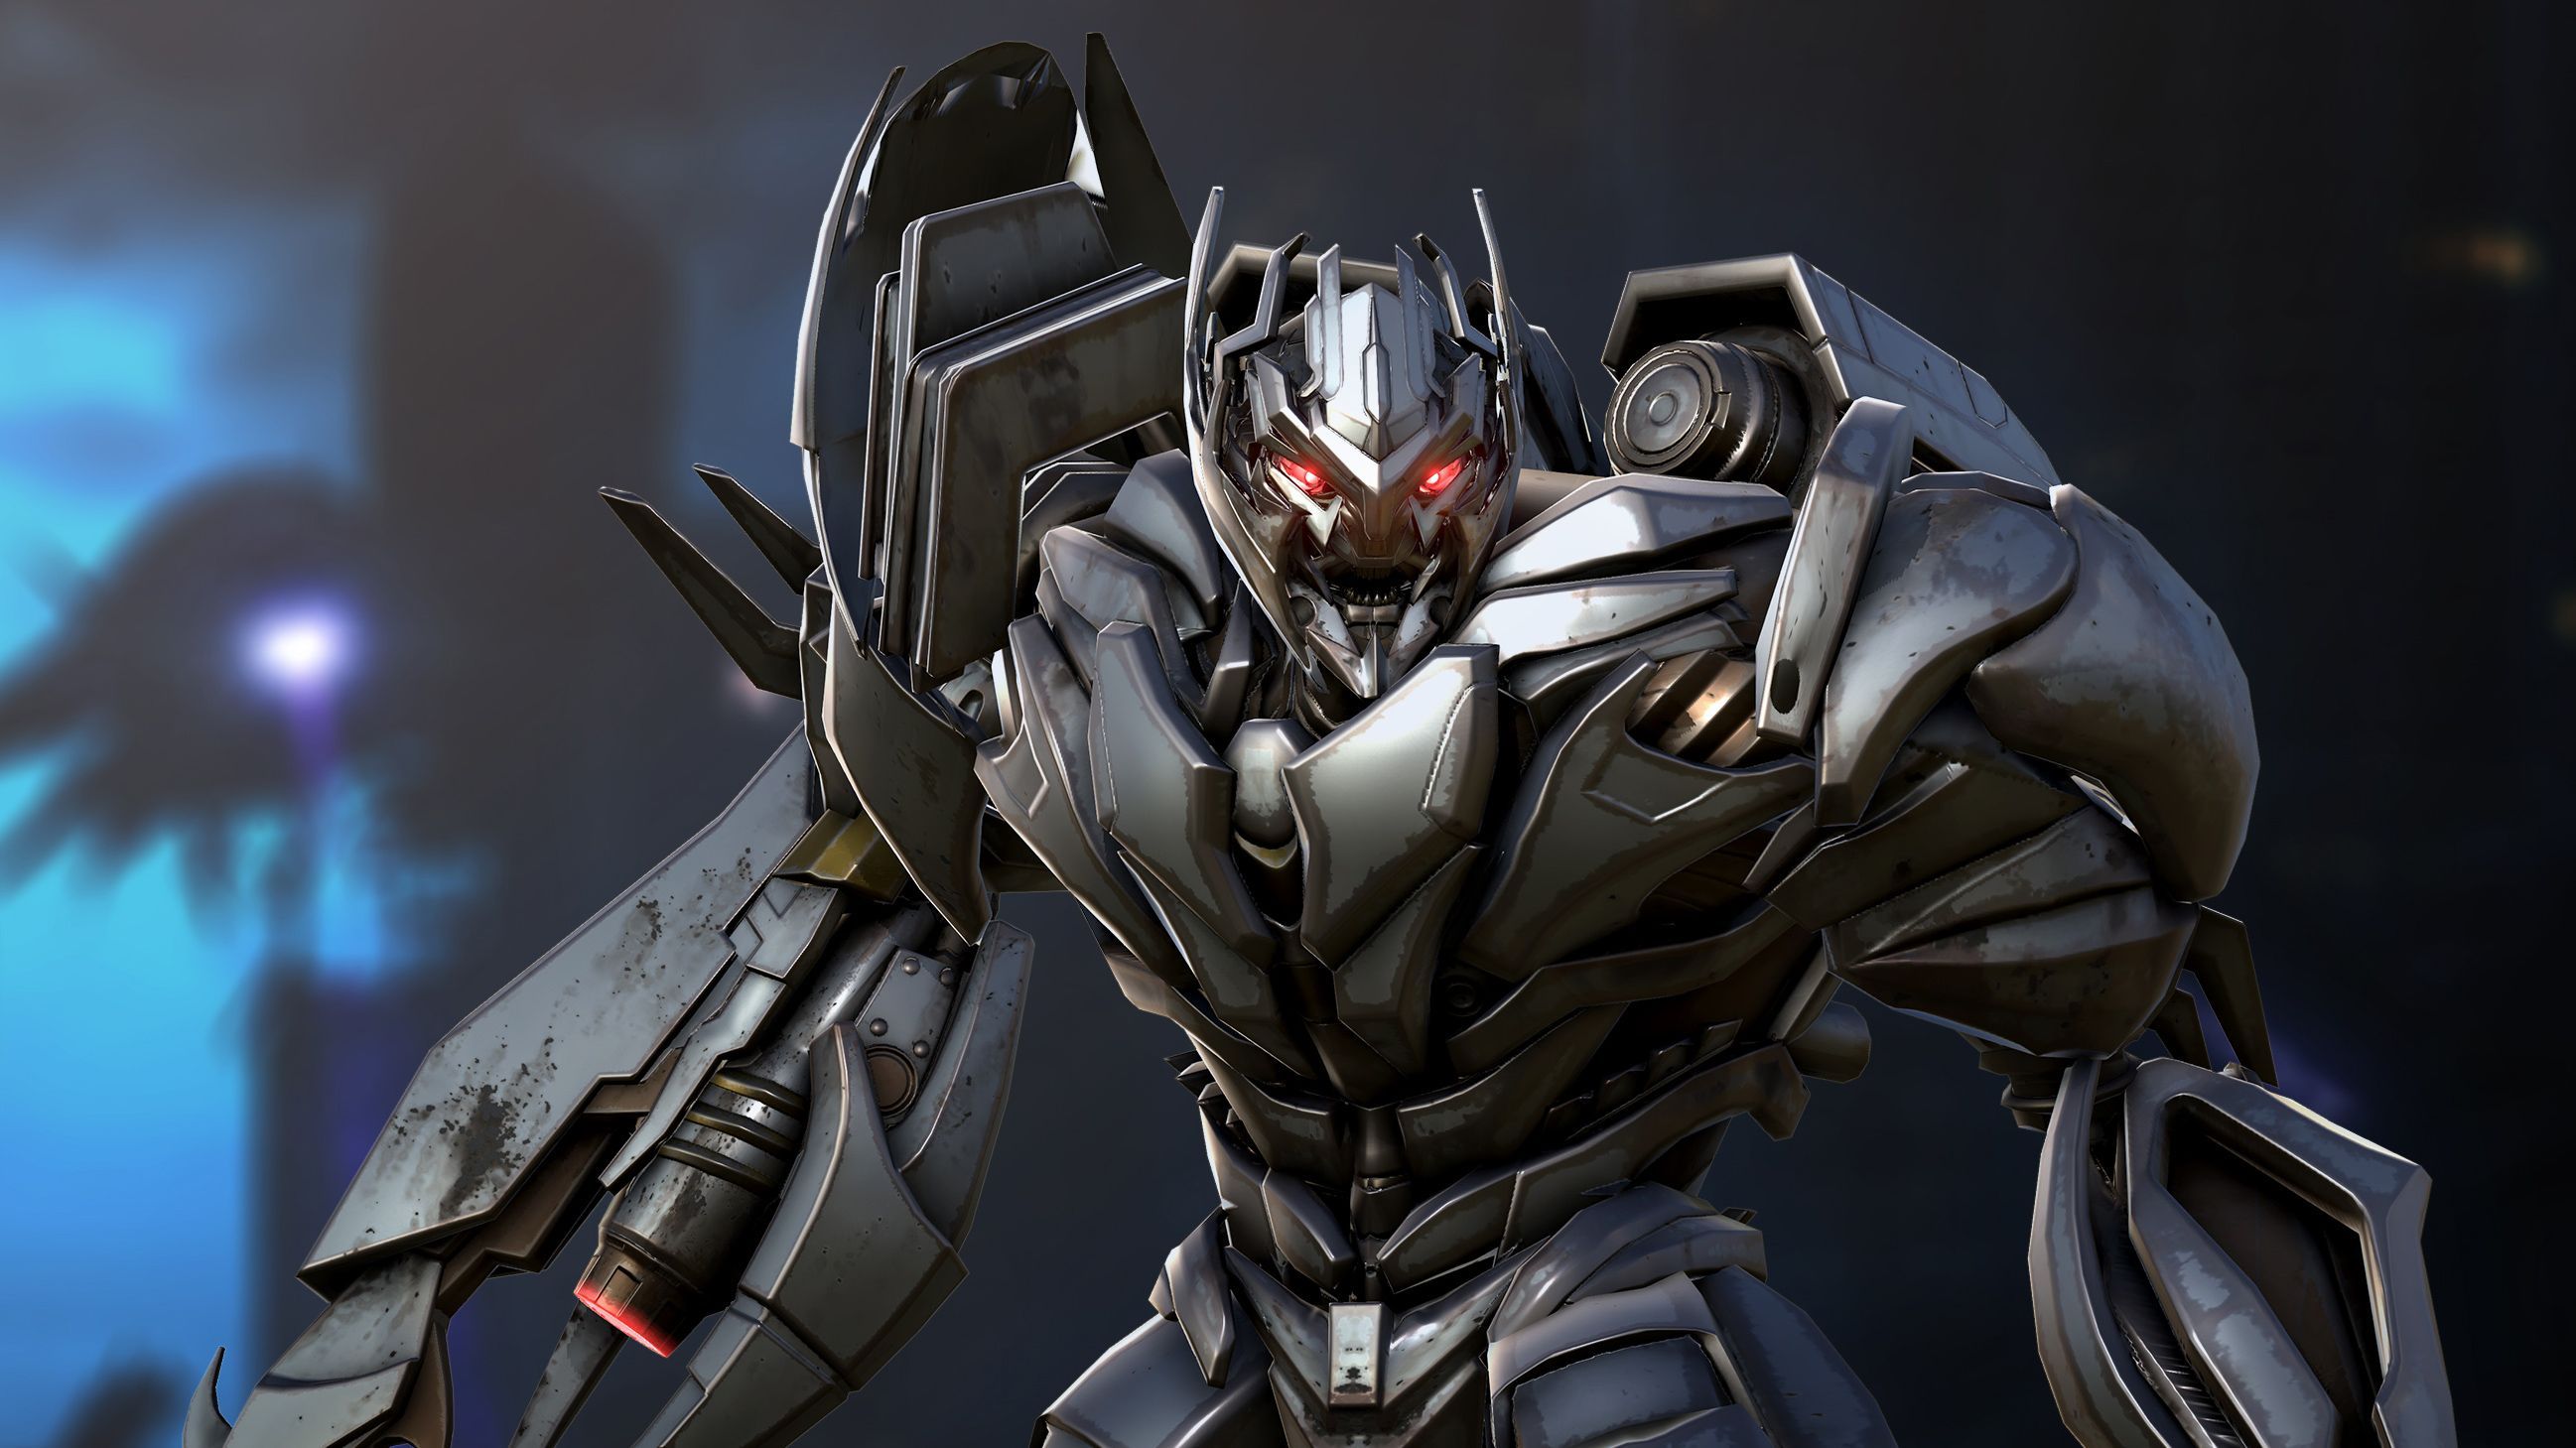 Tons of awesome Transformers Revenge of The Fallen Megatron wallpapers to d...